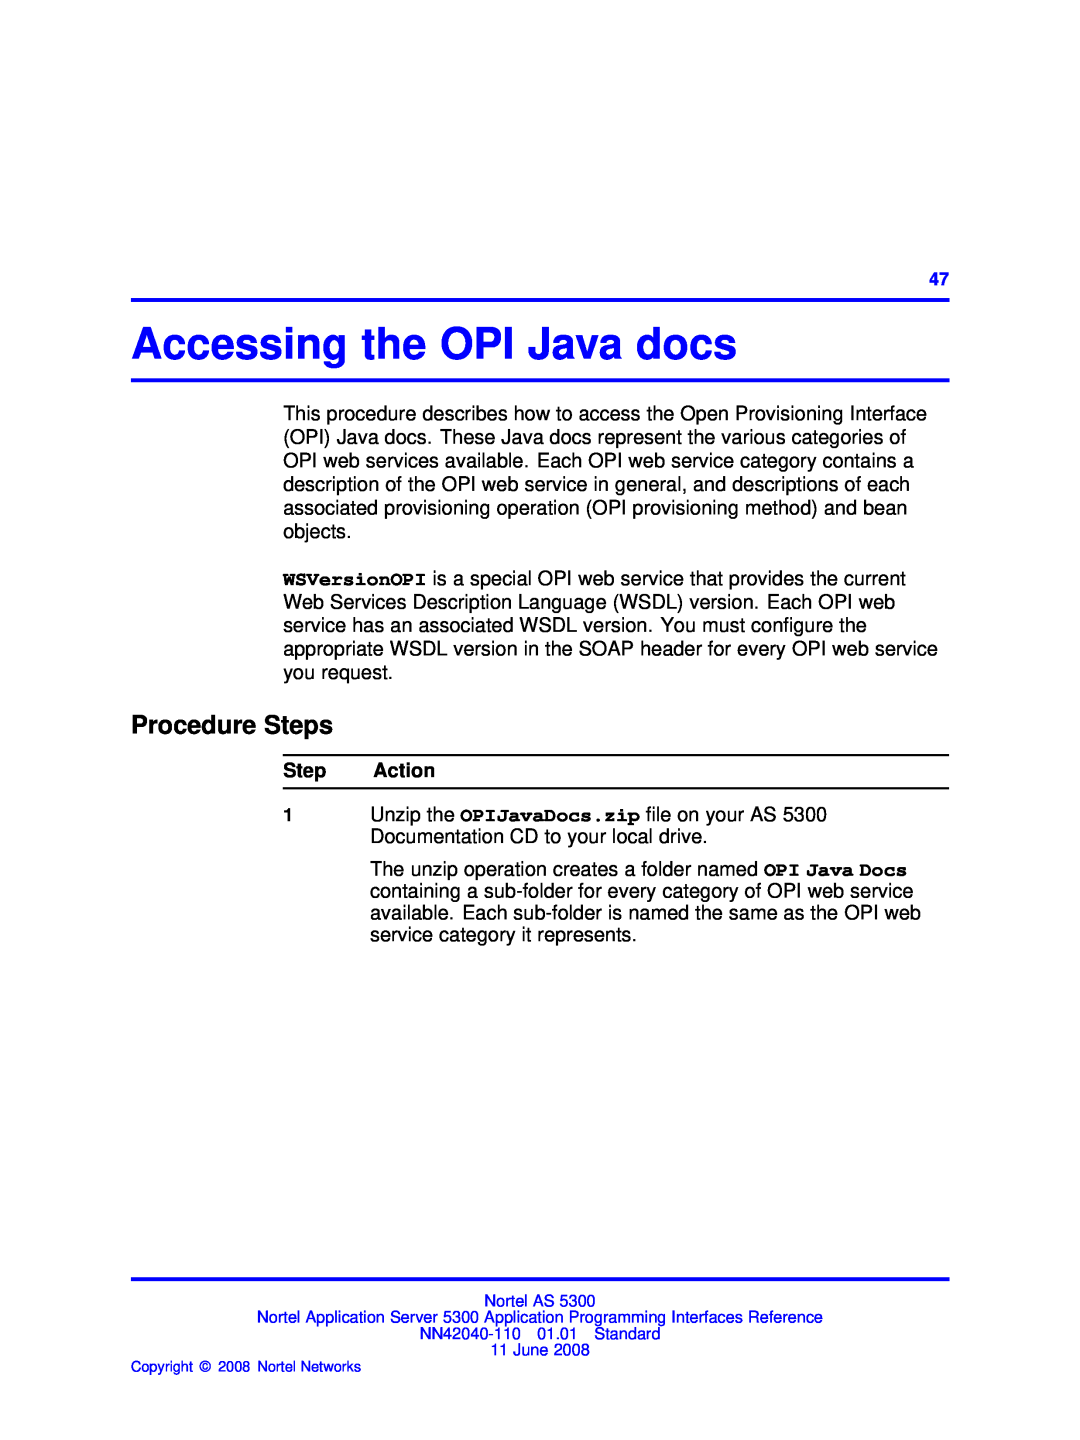 Nortel Networks AS 5300 manual Accessing the OPI Java docs, Procedure Steps, Step Action 